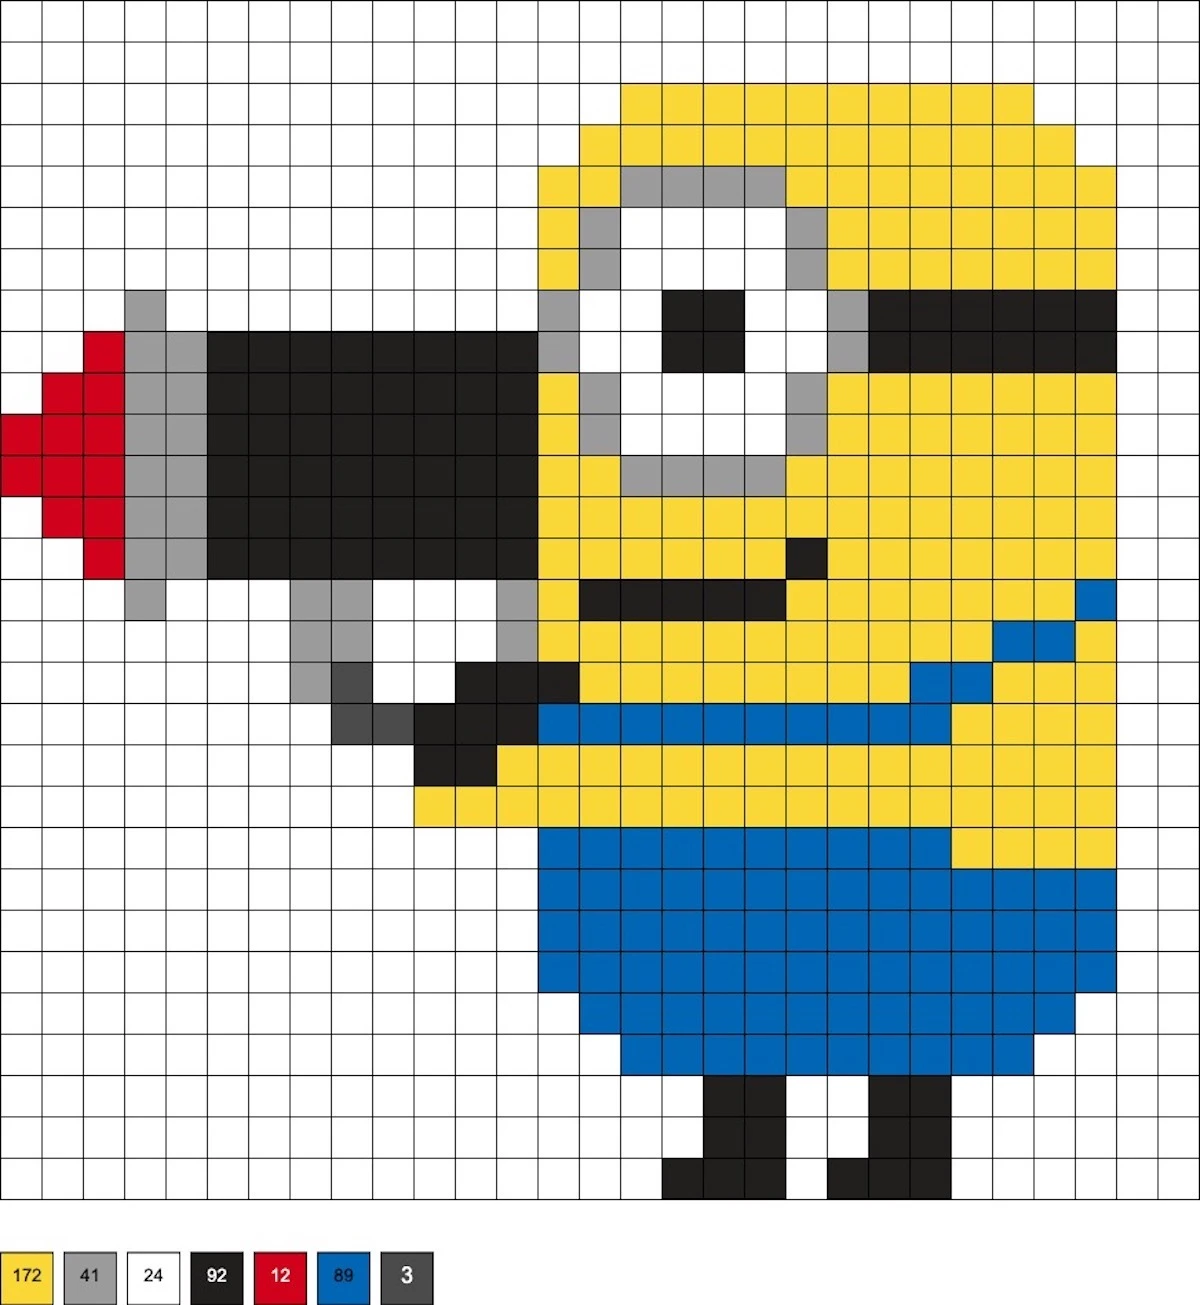 minion with a rocket launcher